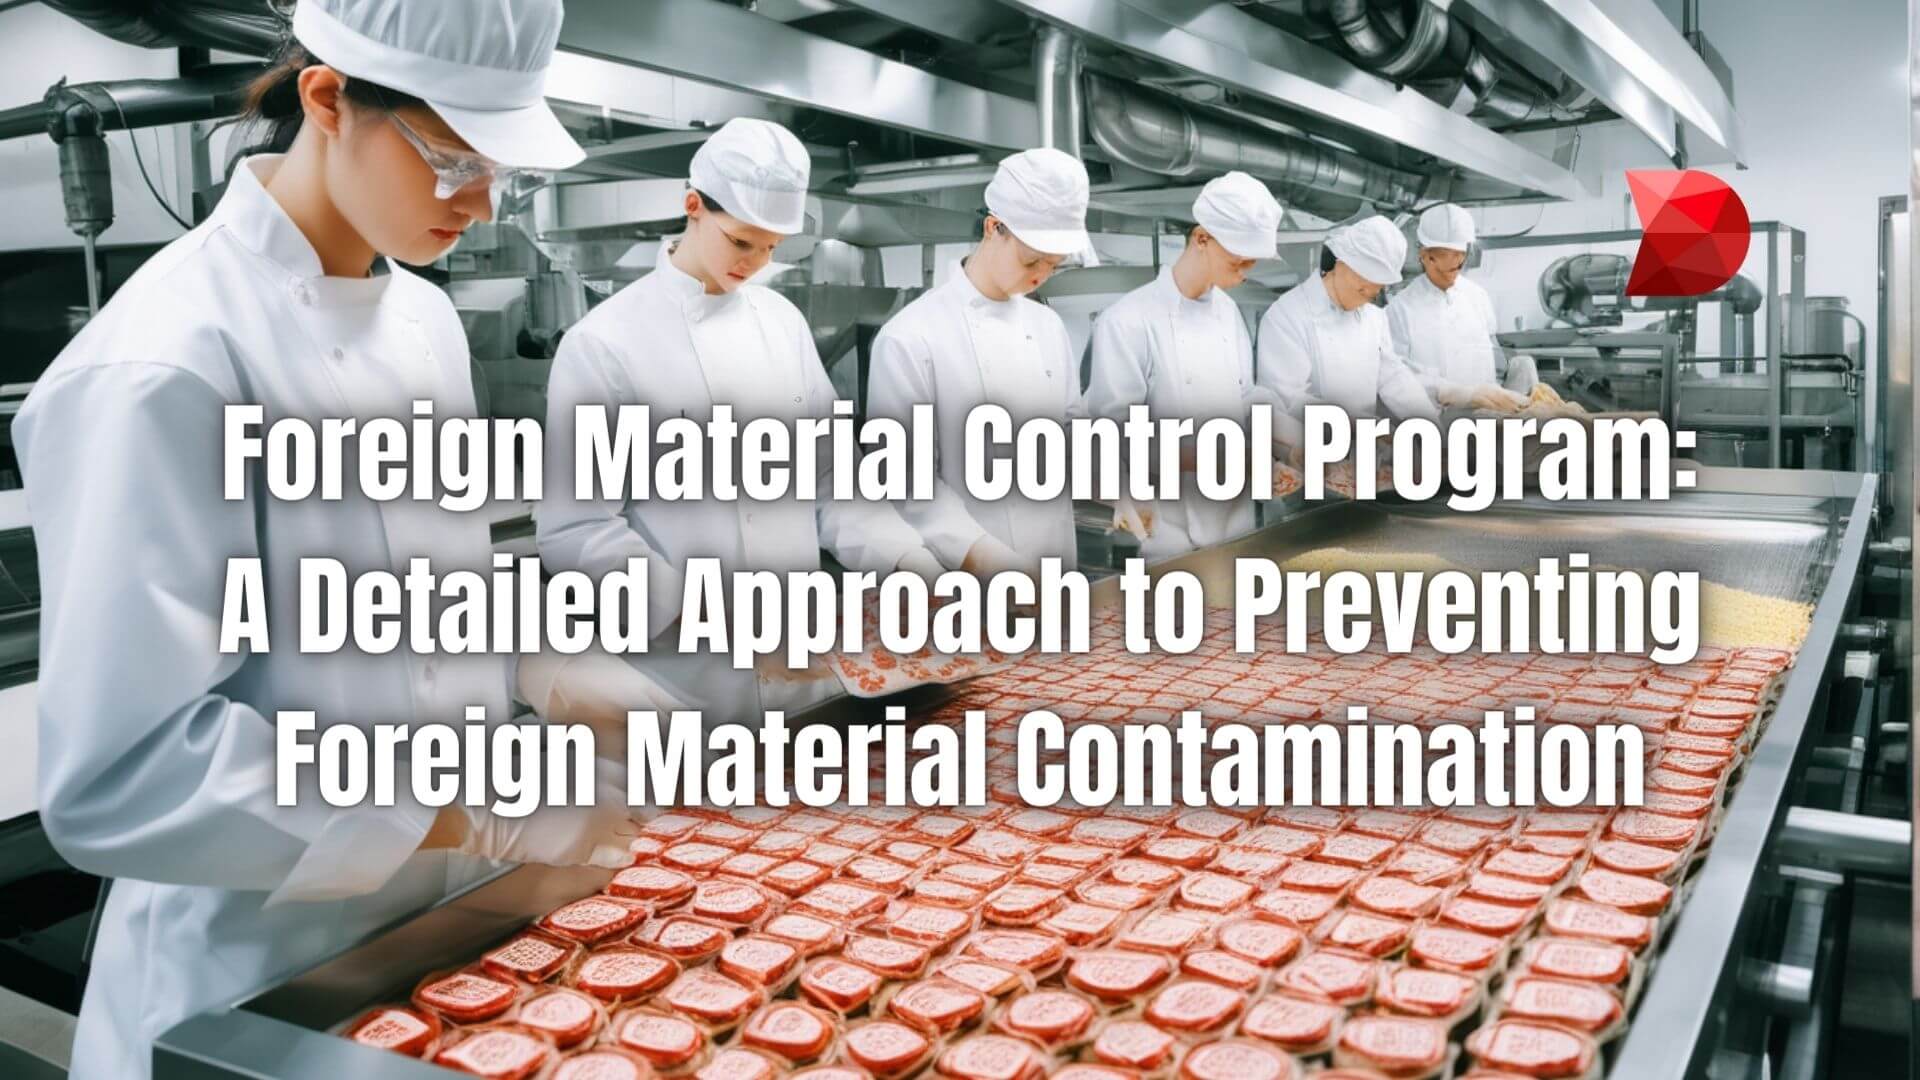 Safeguard your processes from contamination. Explore our detailed guide to a robust Foreign Material Control Program. Learn more!